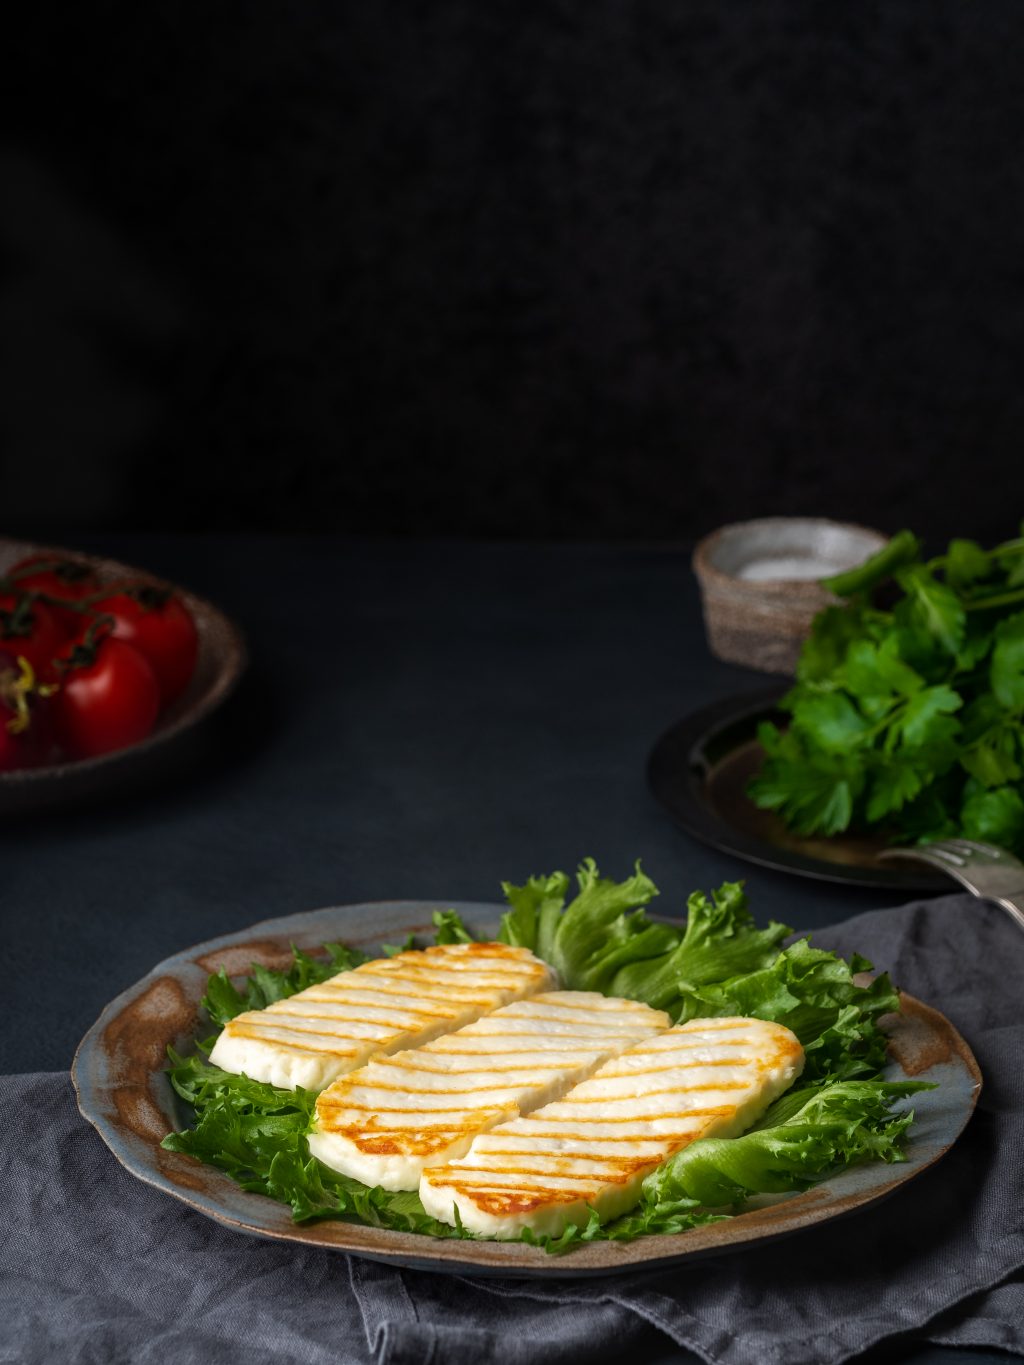 Grilled Halloumi, fried cheese with lettuce salad. Balanced diet on dark